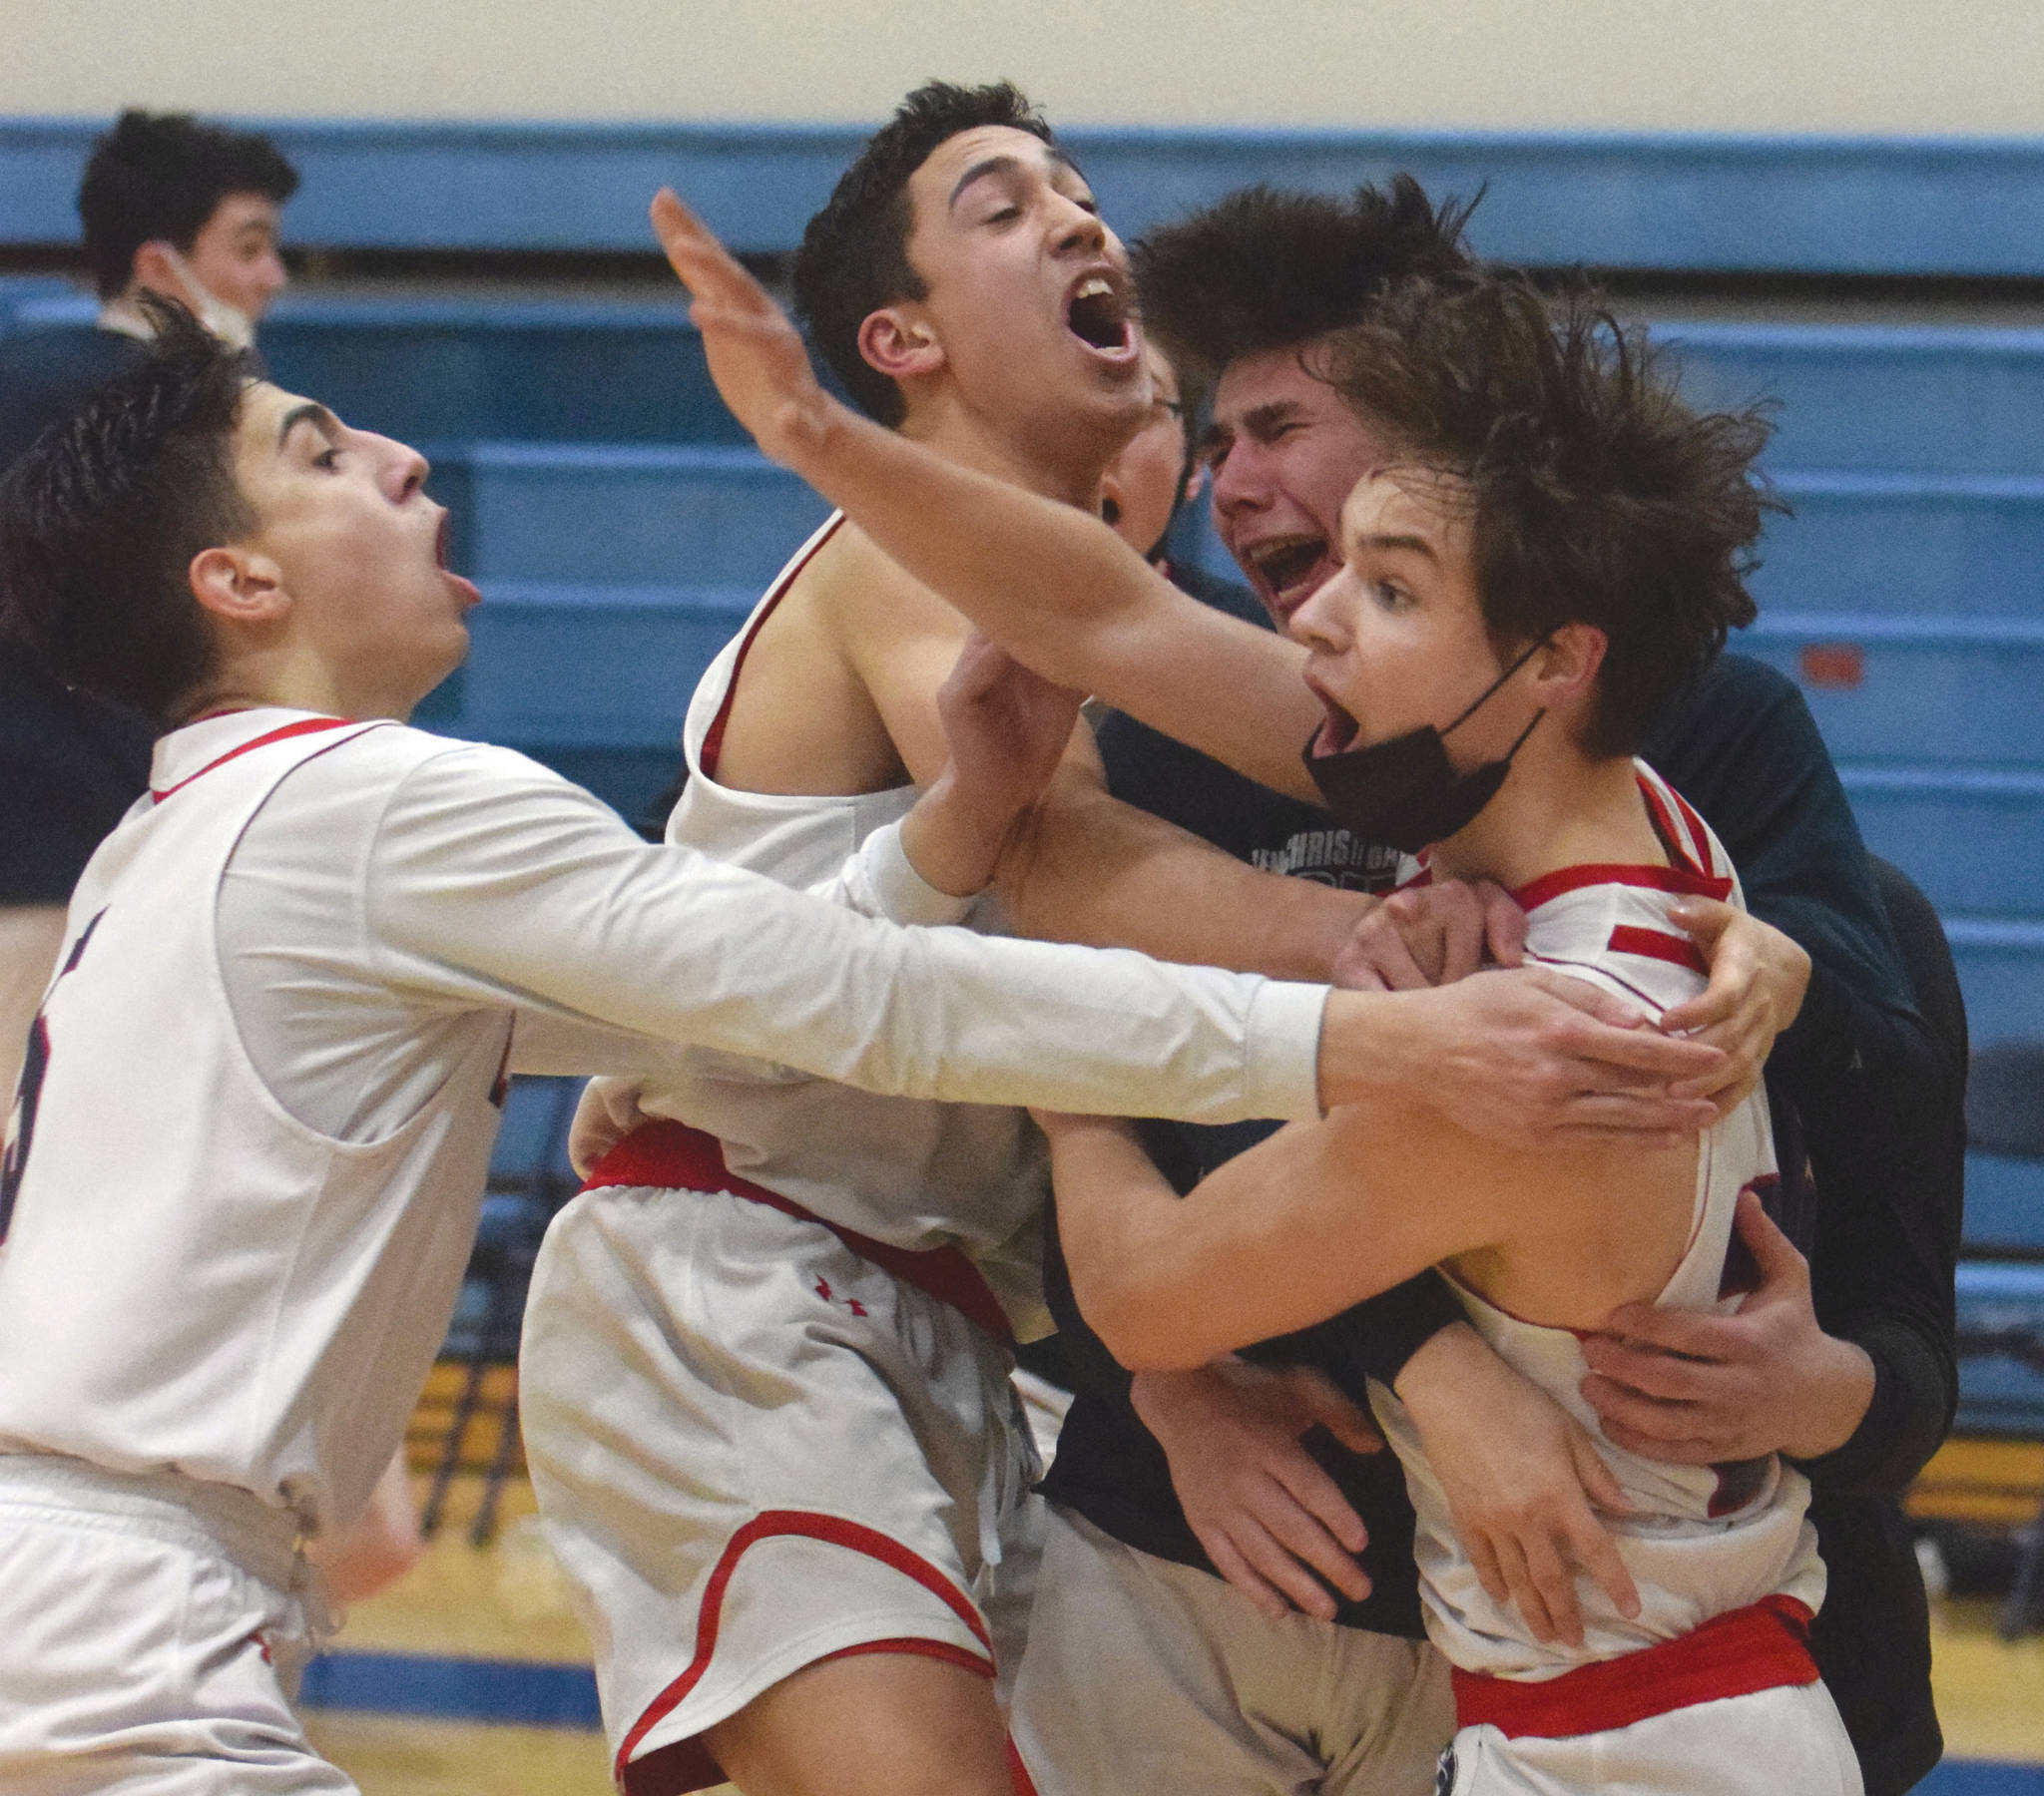 Lumen Christi’s Brenden Gregory is mobbed by teammates after hitting the game-winning 3-pointer in the Peninsula Conference championship game against Ninilchik on Friday, March 19, 2021, at Soldotna High School in Soldotna, Alaska. (Photo by Jeff Helminiak/Peninsula Clarion)